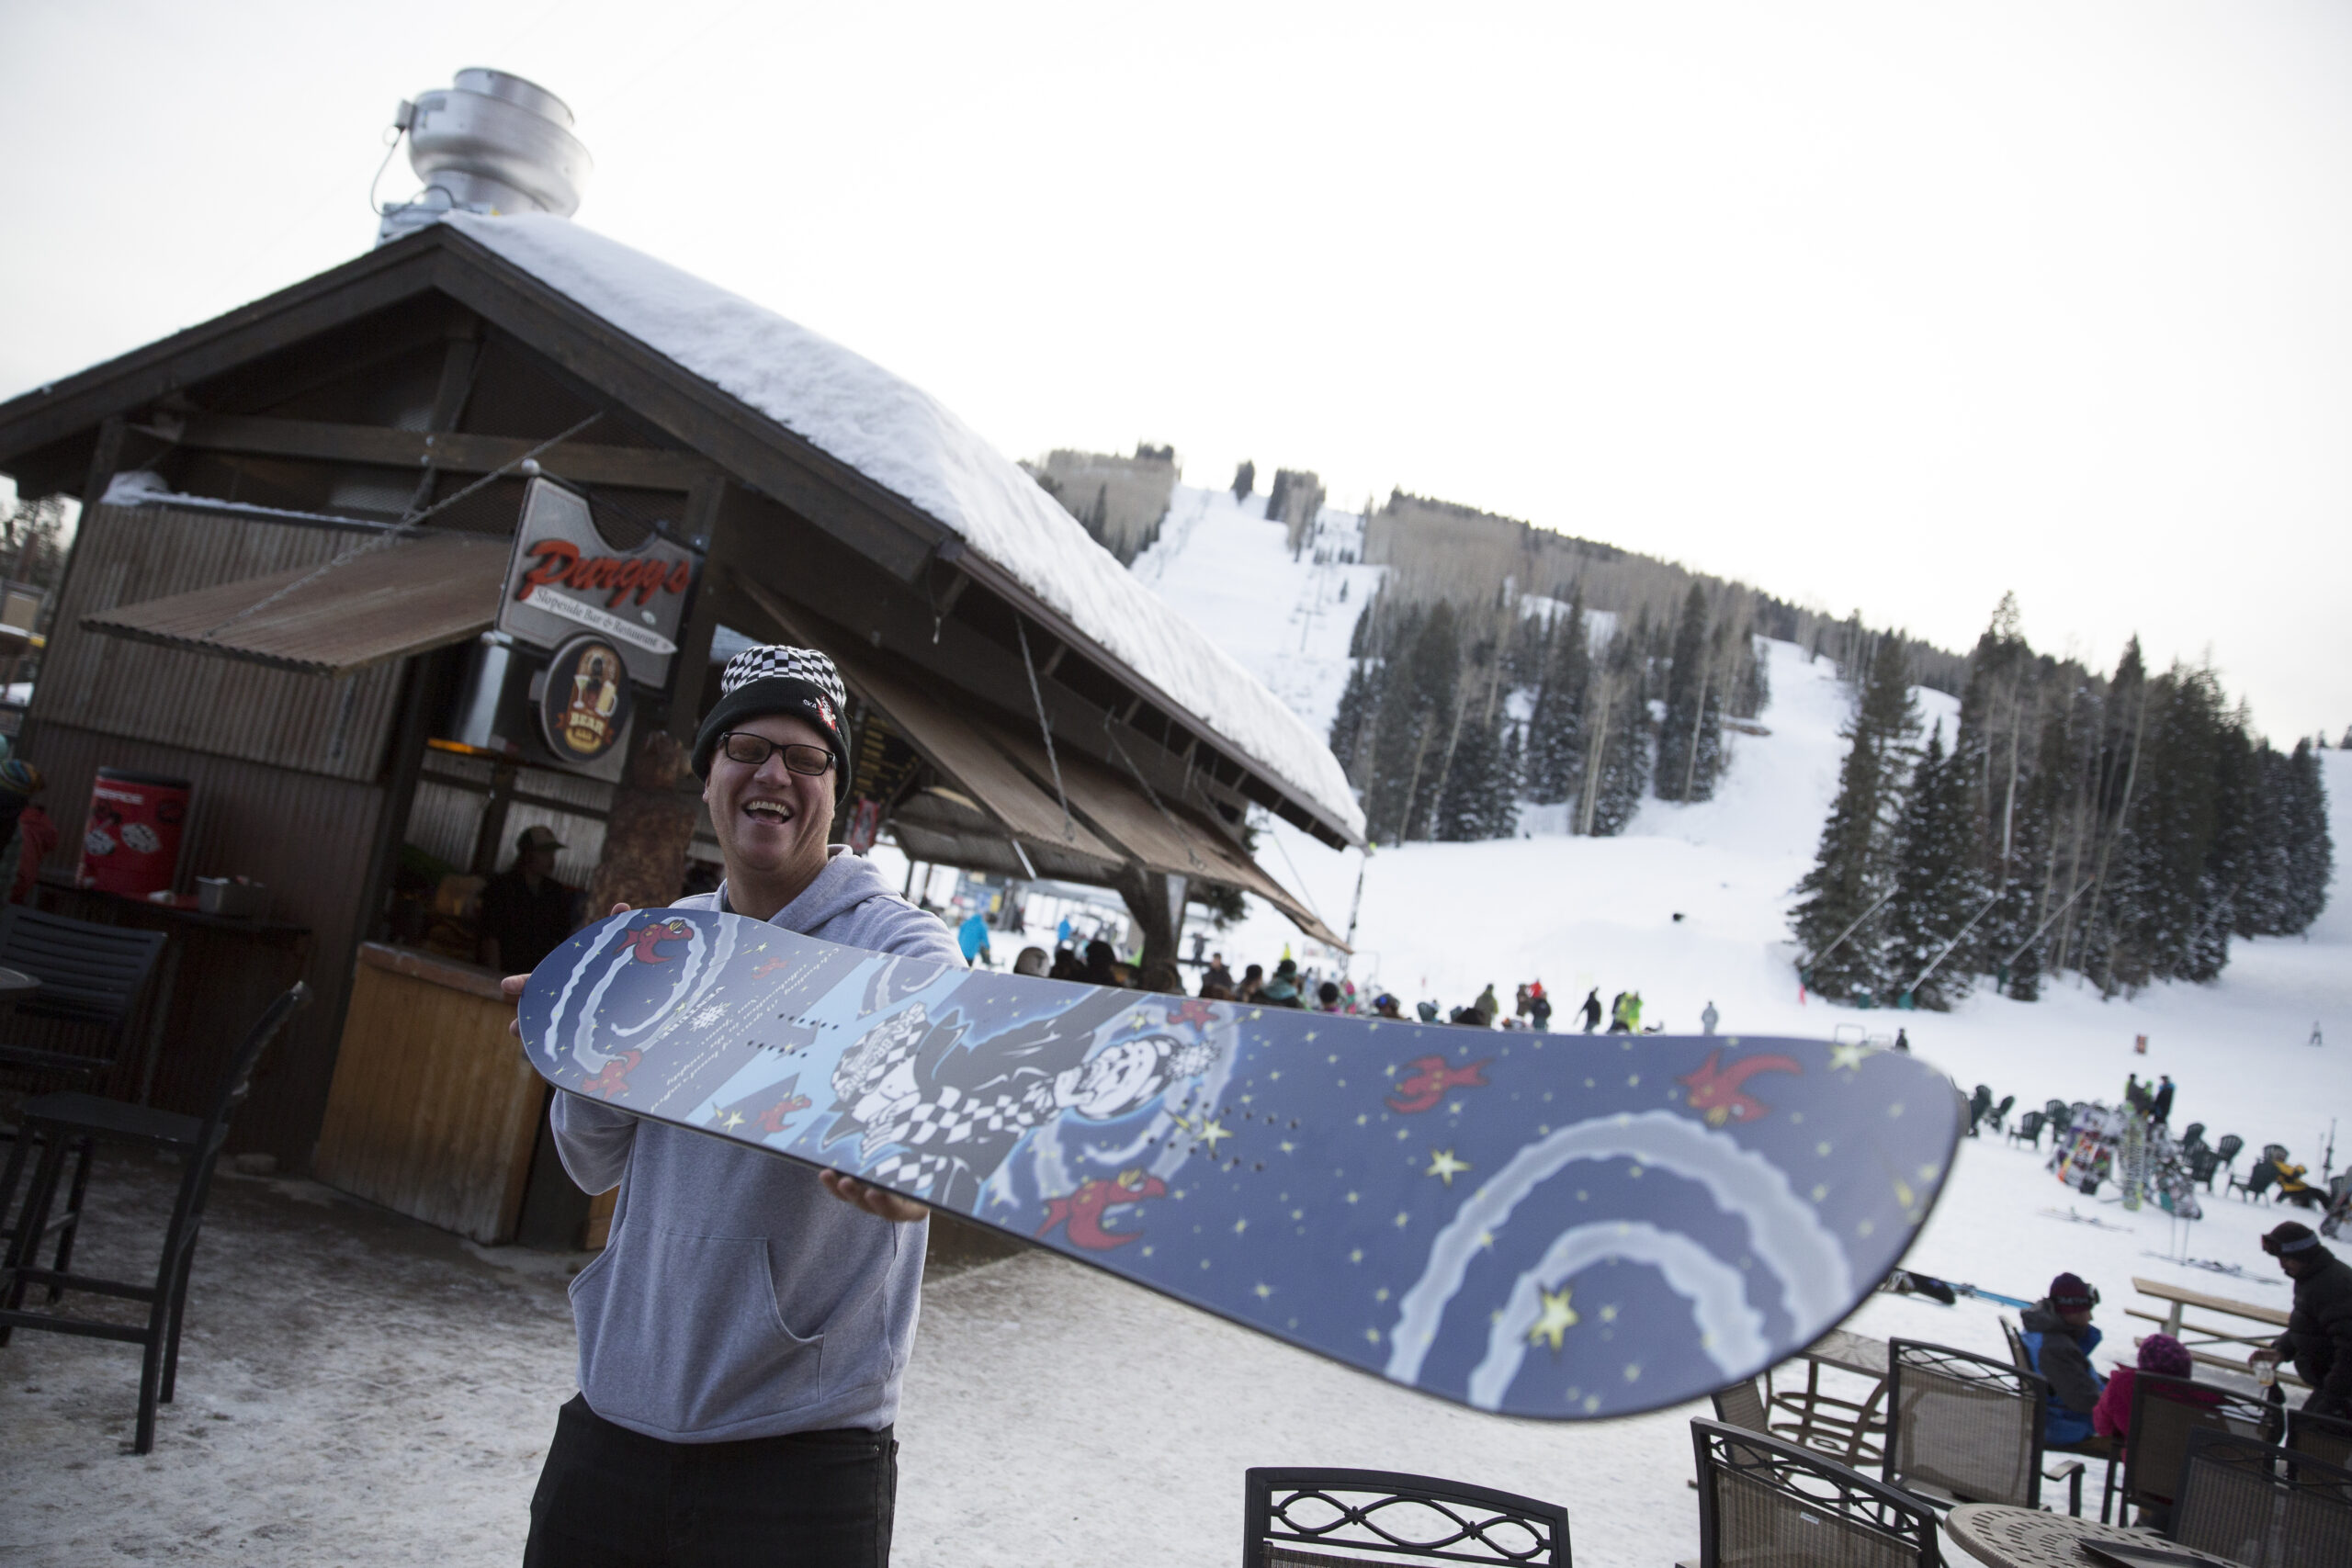 A man smiles and poses with his brand new Ska Brewing themed Venture snowboard